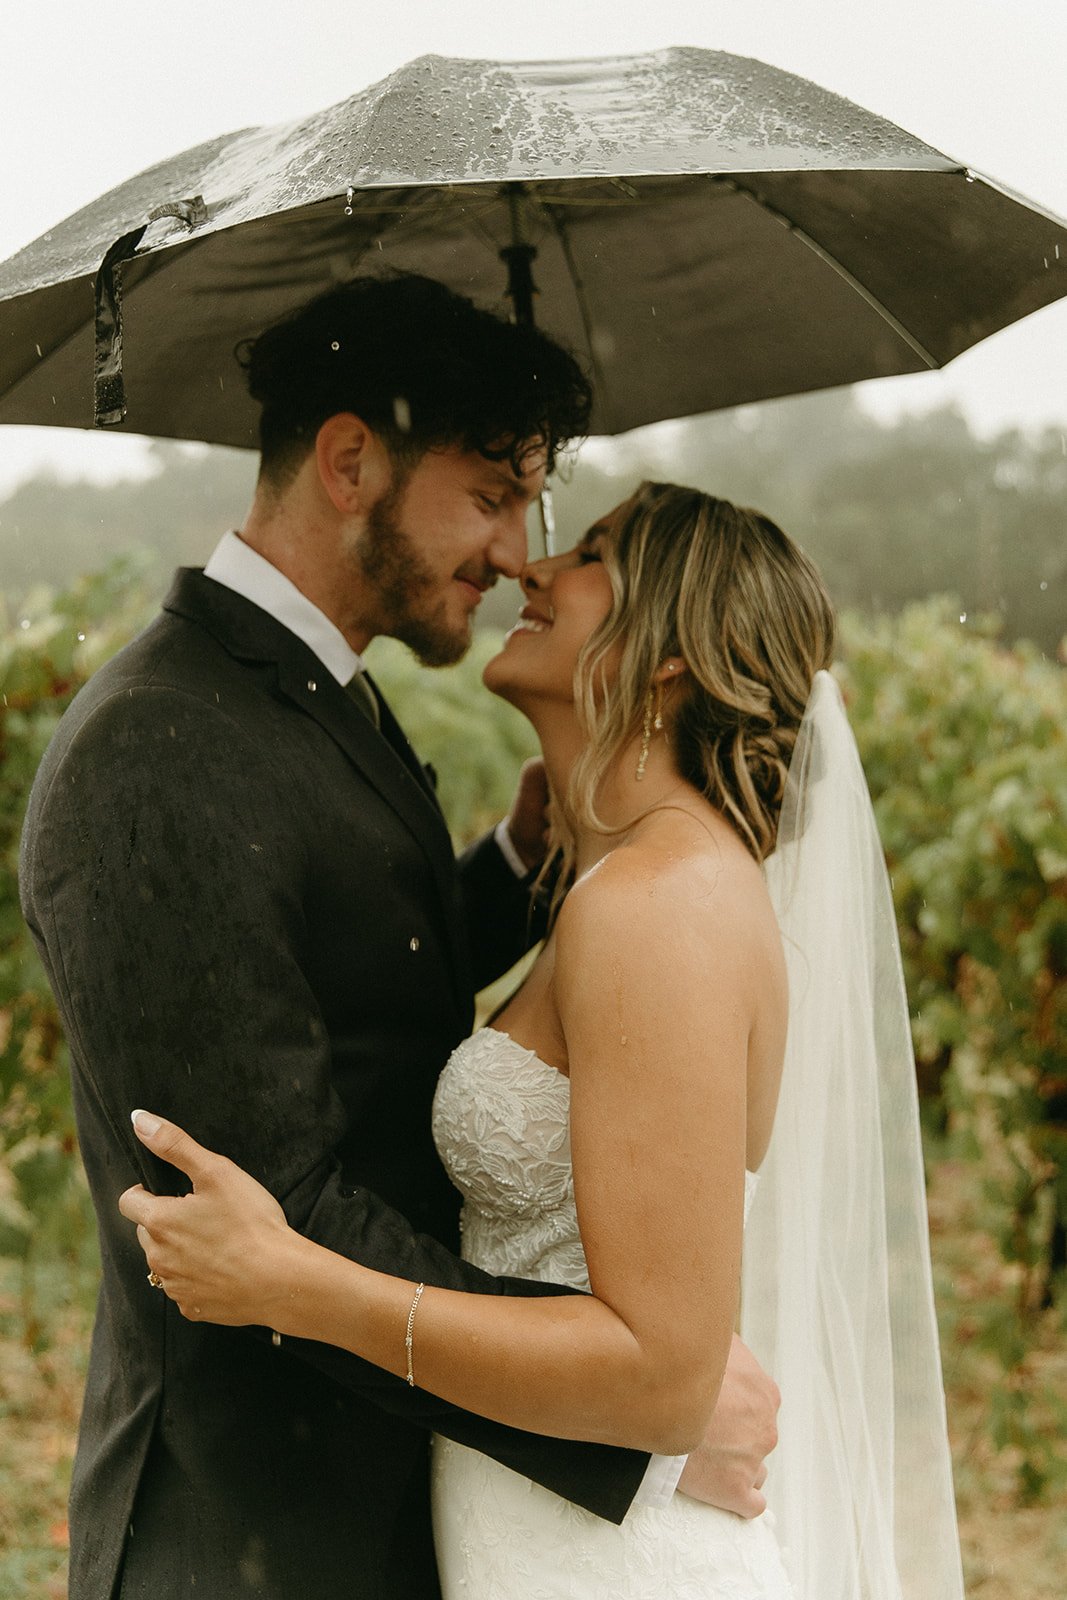 Bride and groom smiling in the rain